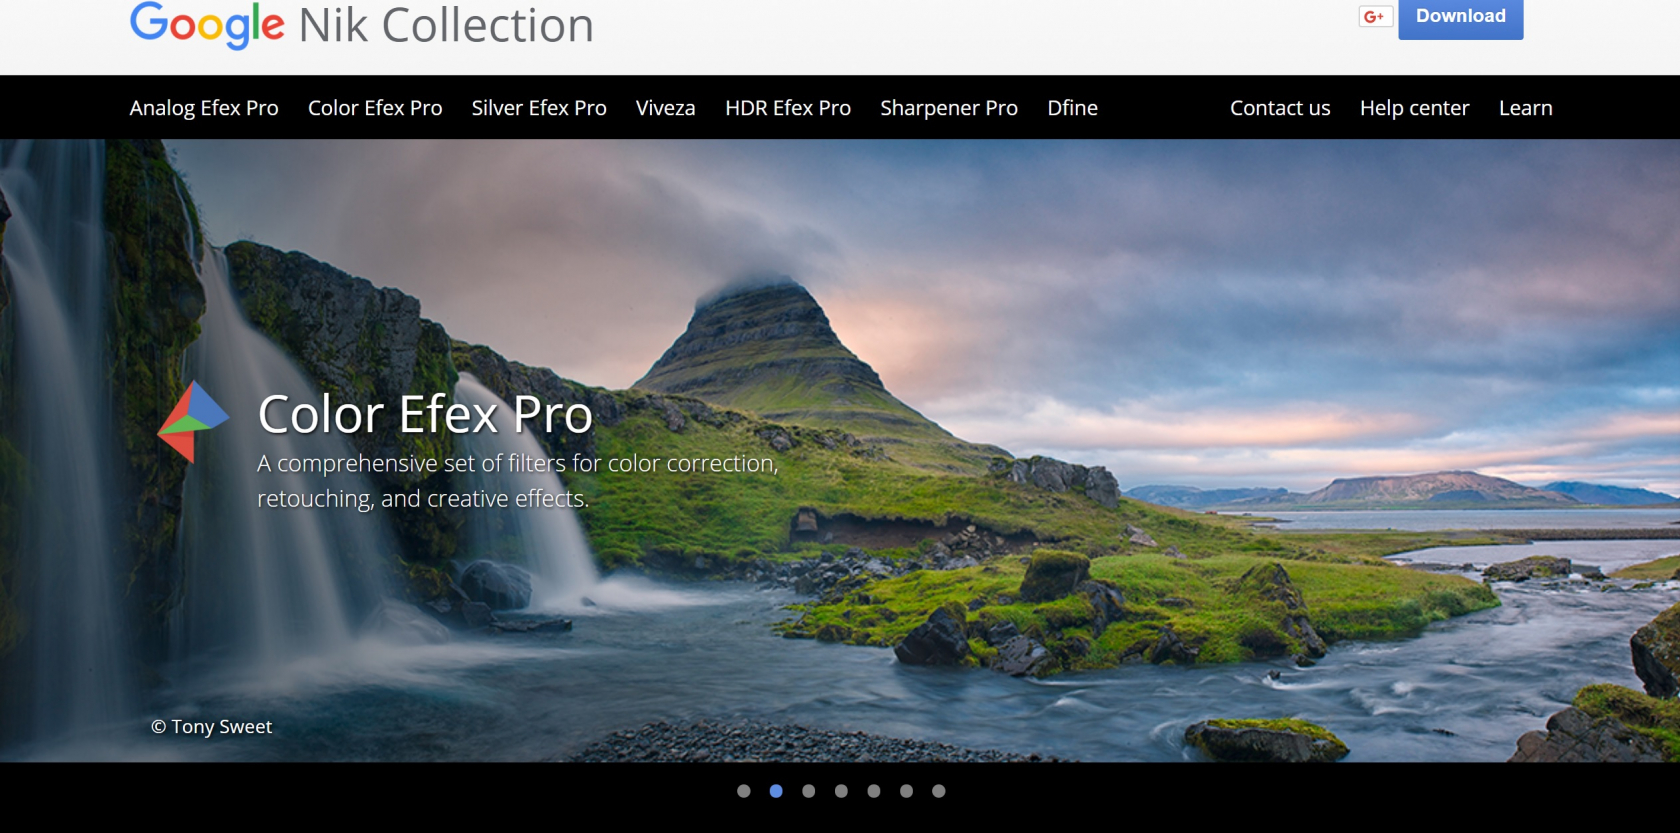 DxO saves Google's Nik Collection photo editing software from extinction